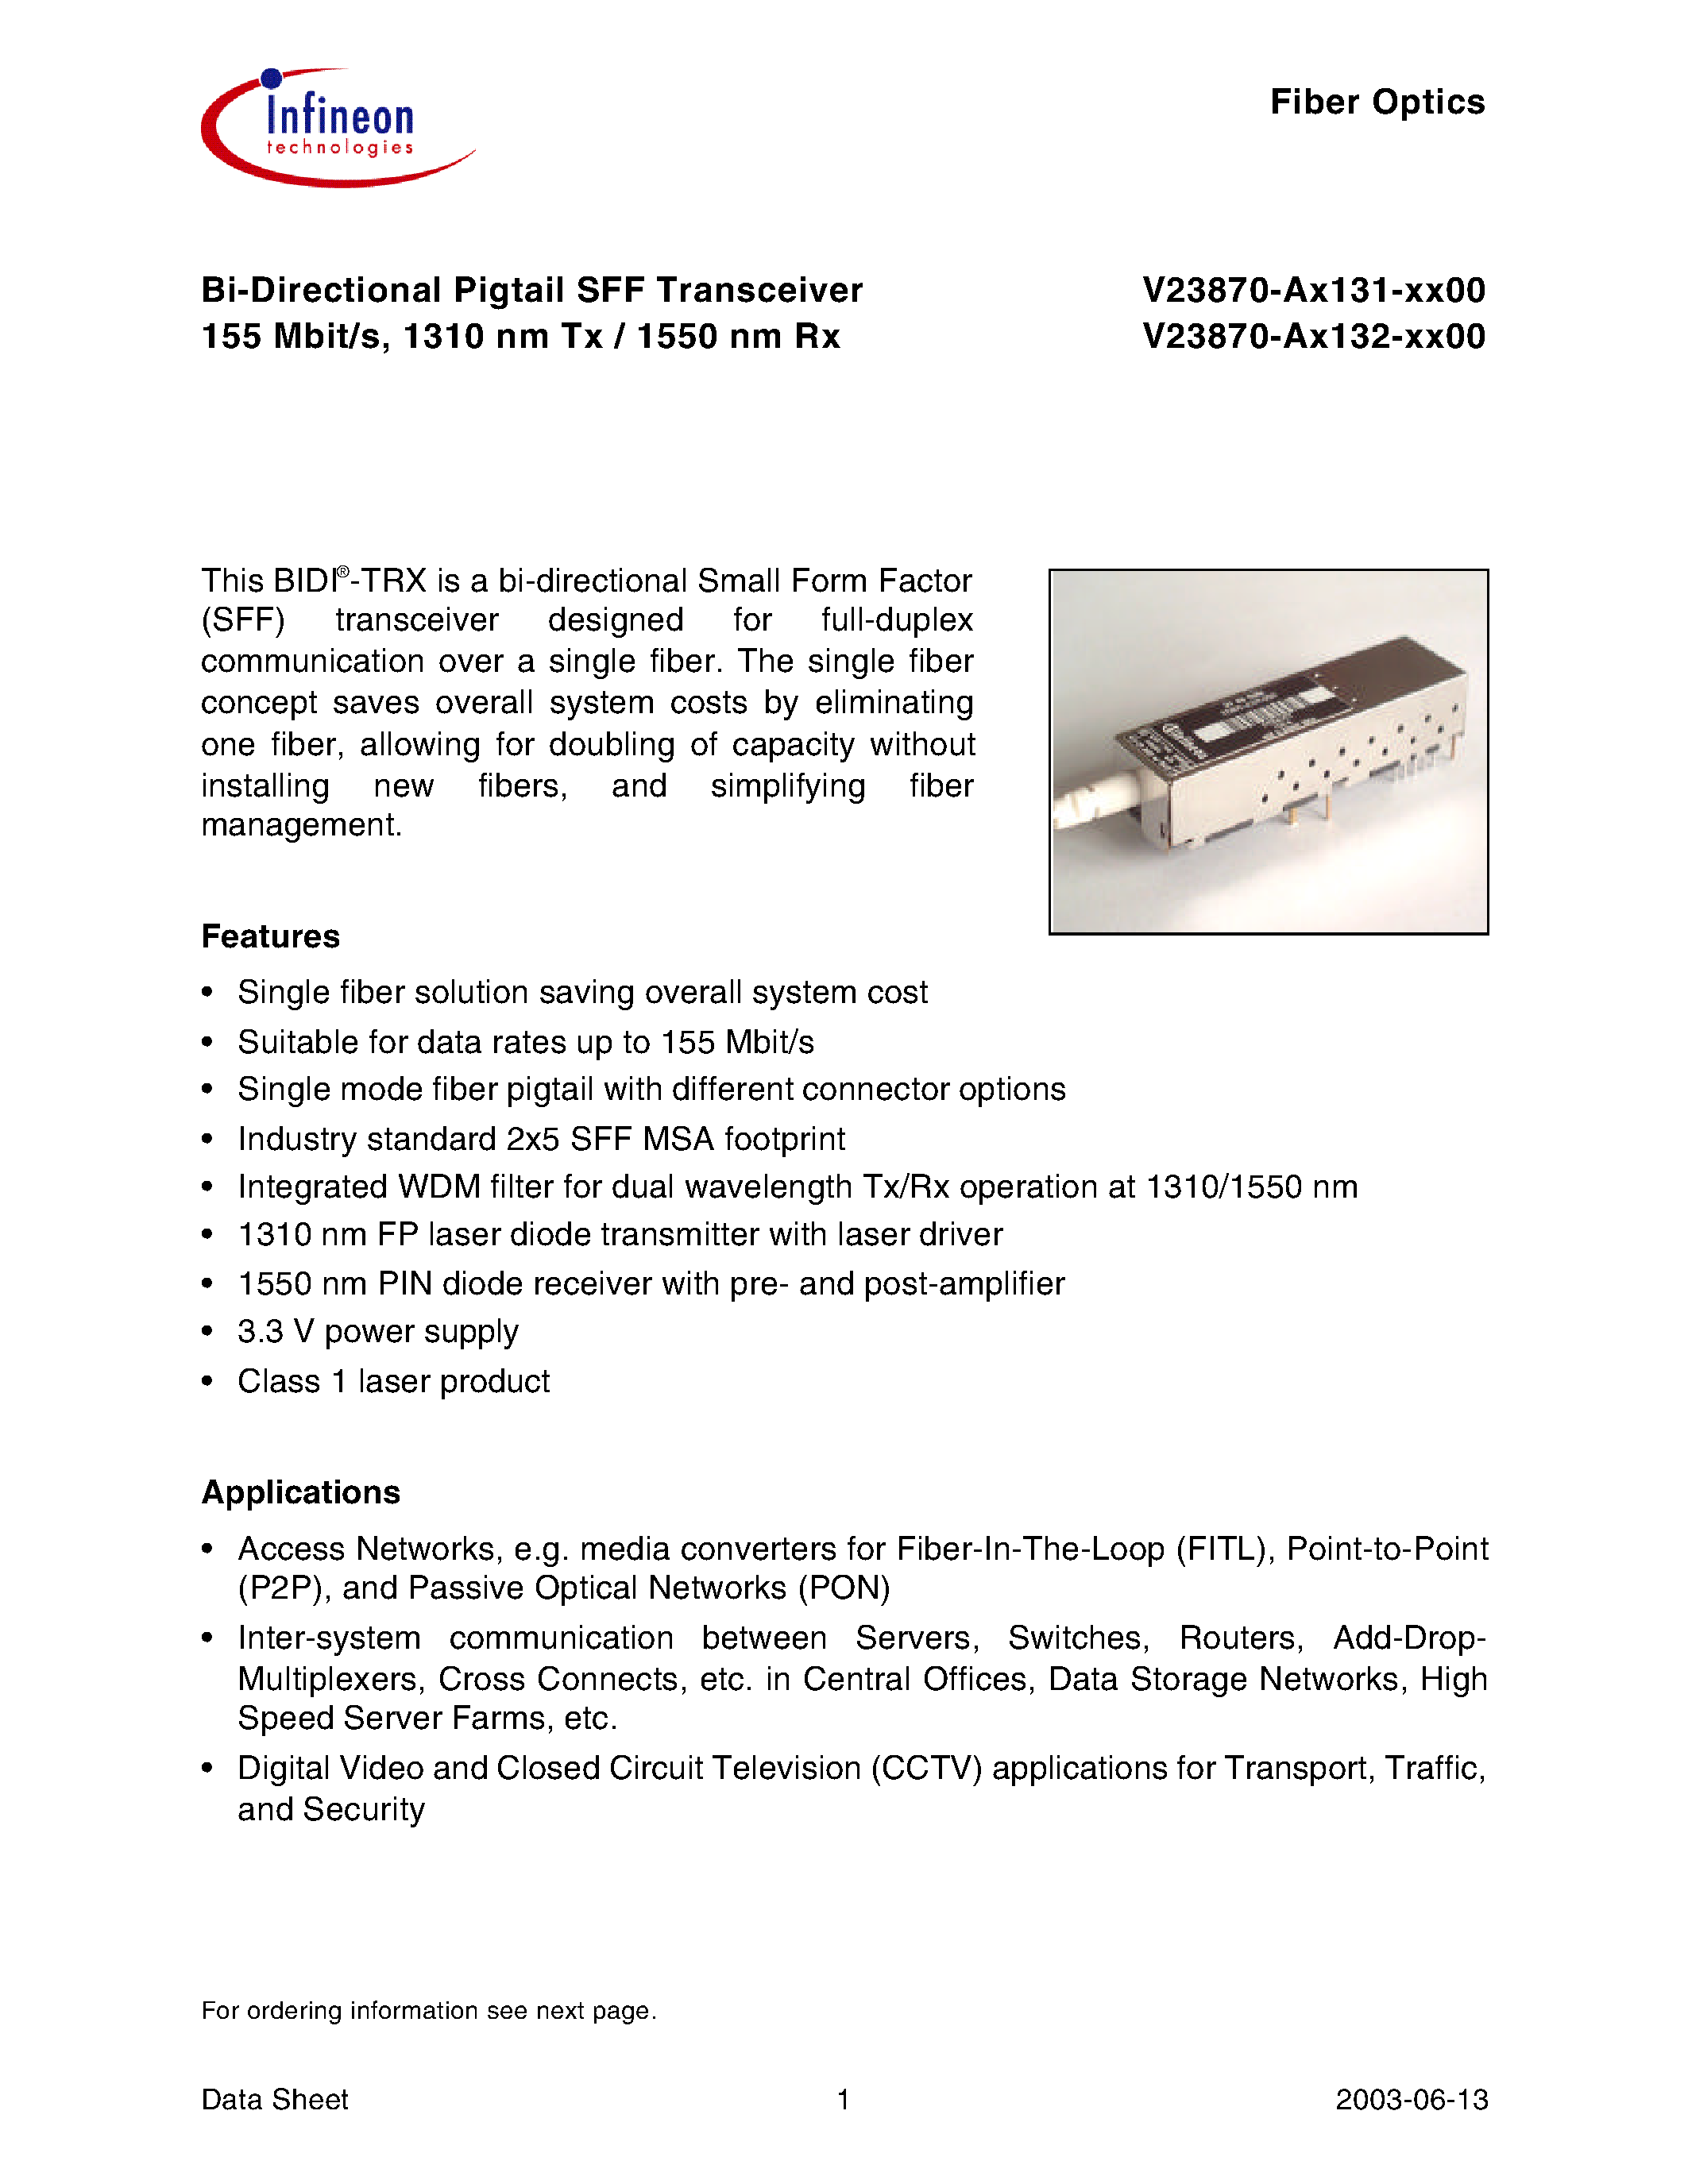 Datasheet V23870-A1132-C500 - Bi-Directional Pigtail SFF Transceiver 155 Mbit/s/ 1310 nm Tx / 1550 nm Rx page 1